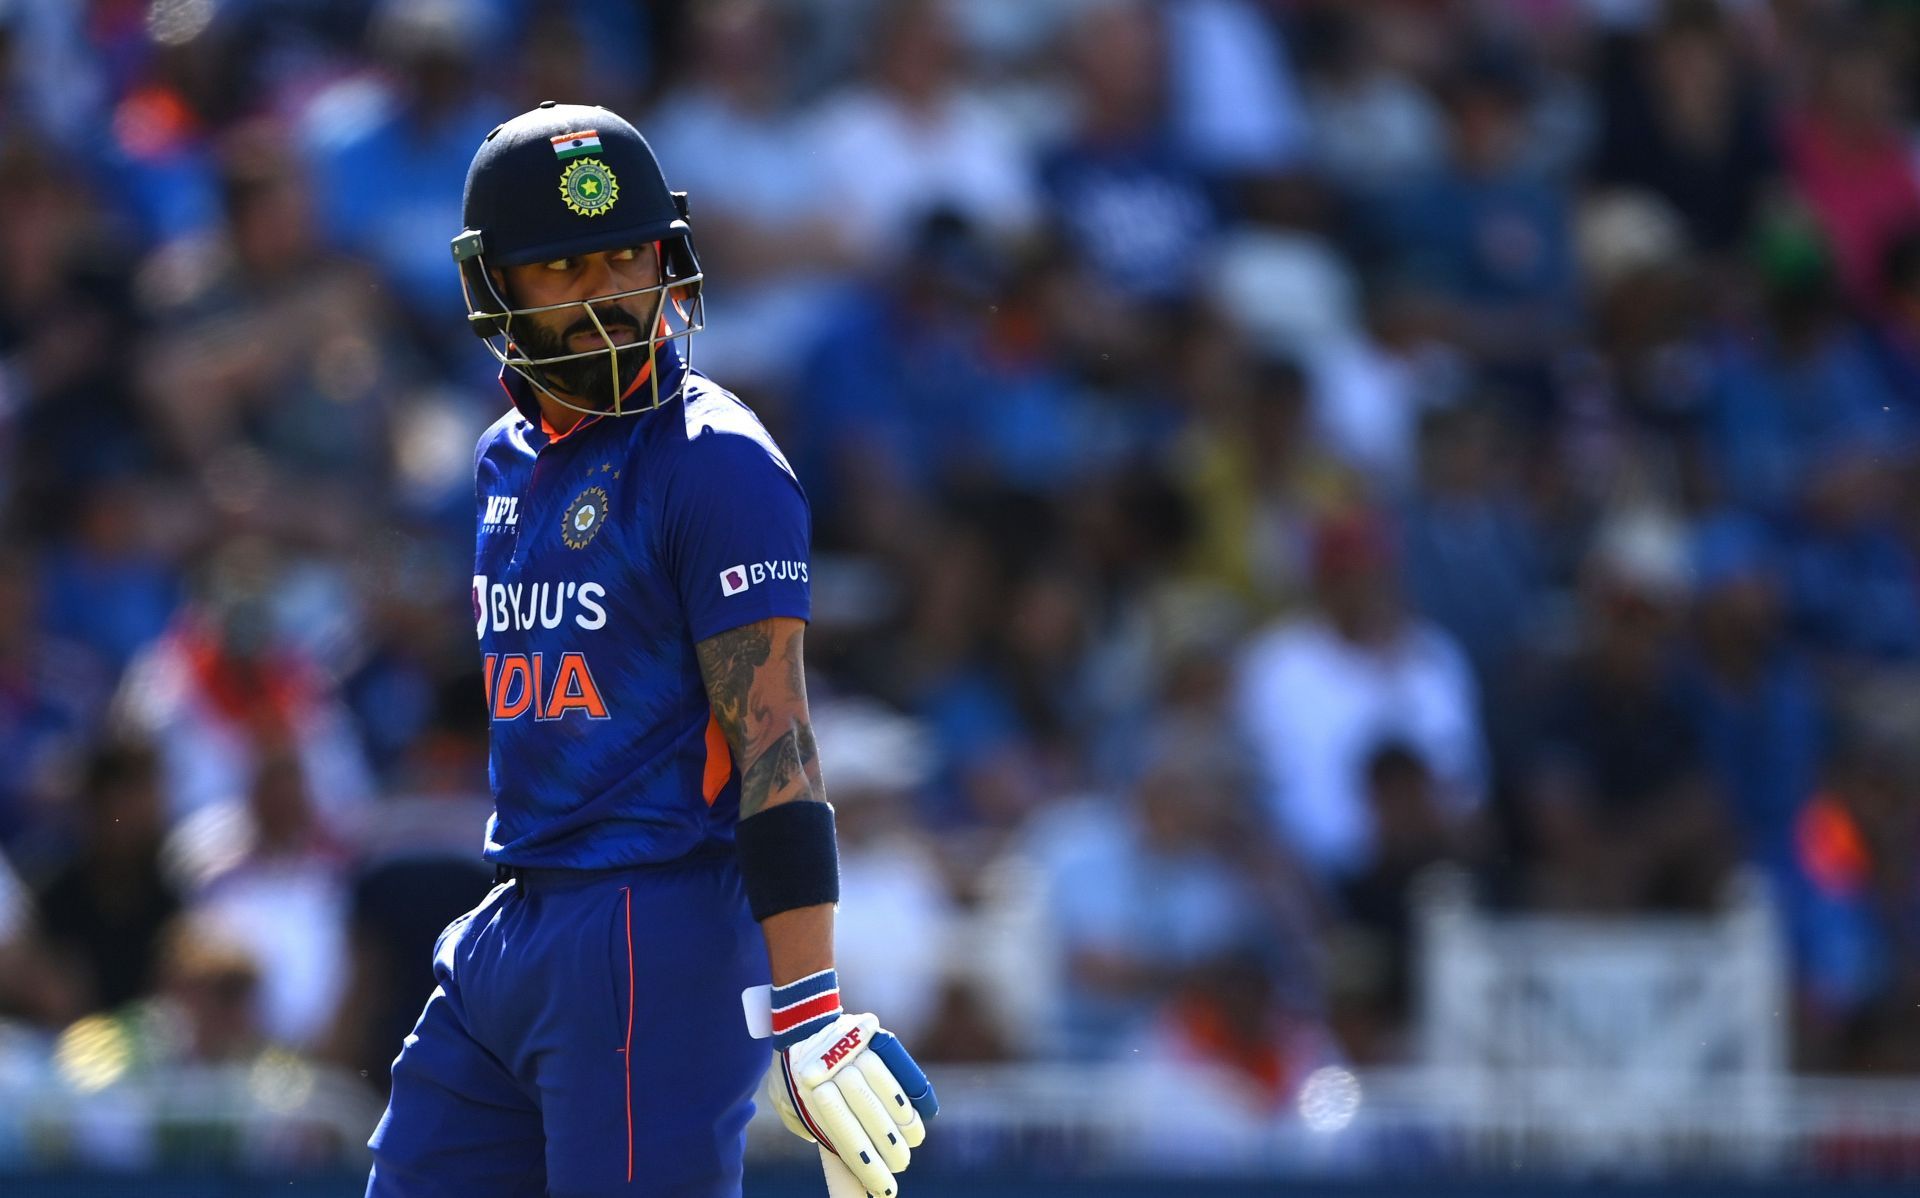 Virat Kohli failed to make a significant contribution in the second ODI against England.